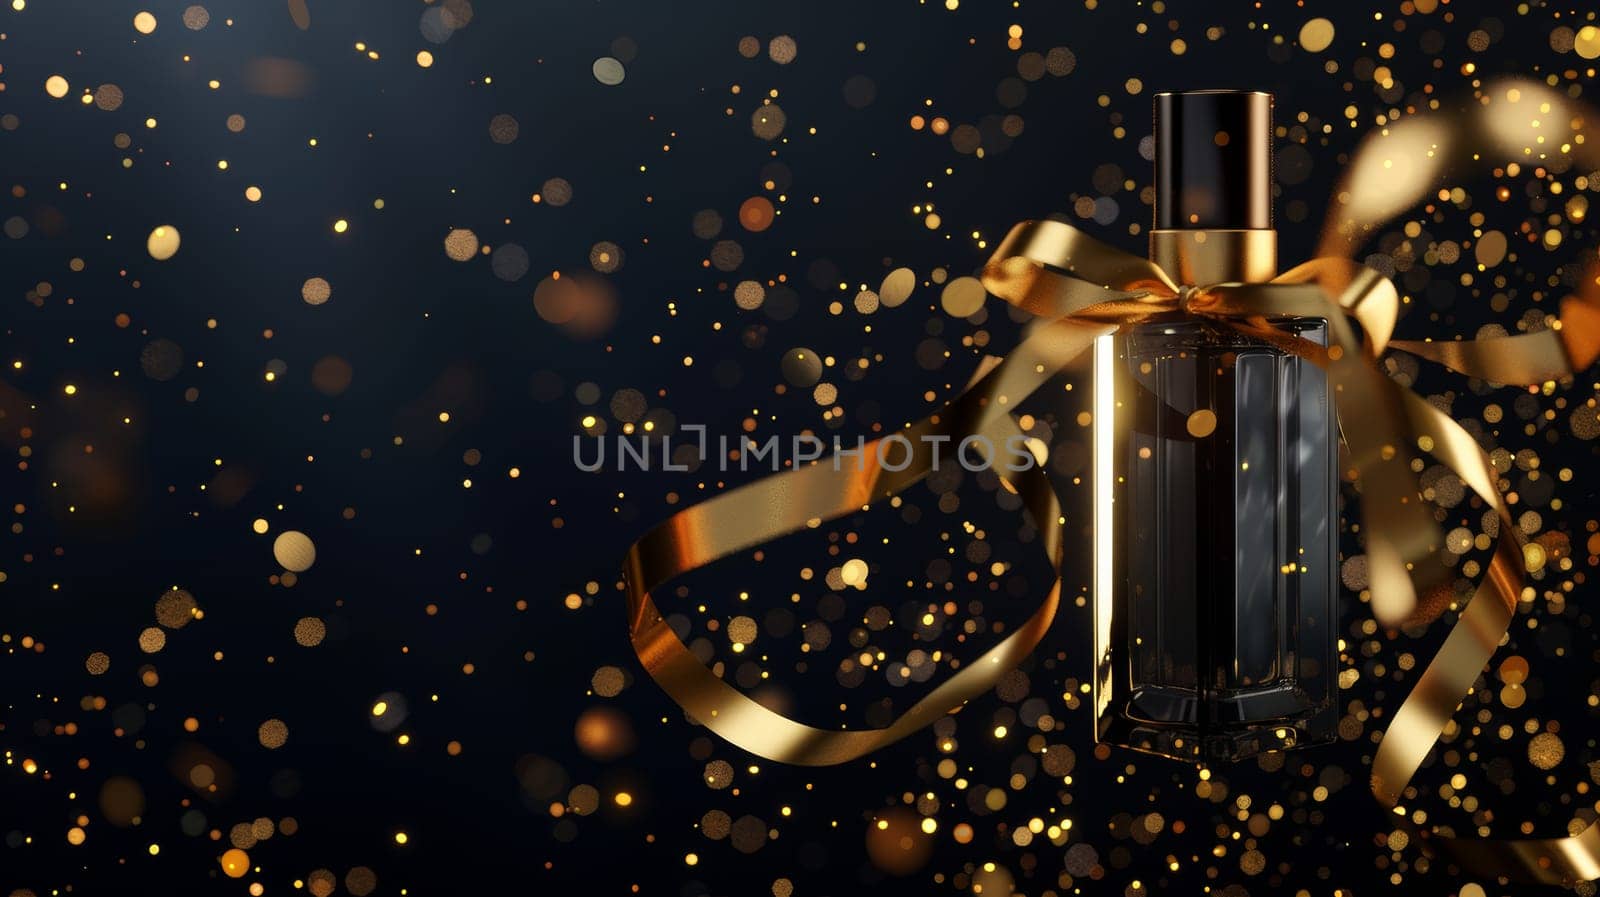 The design features a gold ribbon-wrapped perfume bottle on a black background with confetti and glowing sparkles. Female fragrance cosmetics and promo posters. 3D modern modern ad banner.